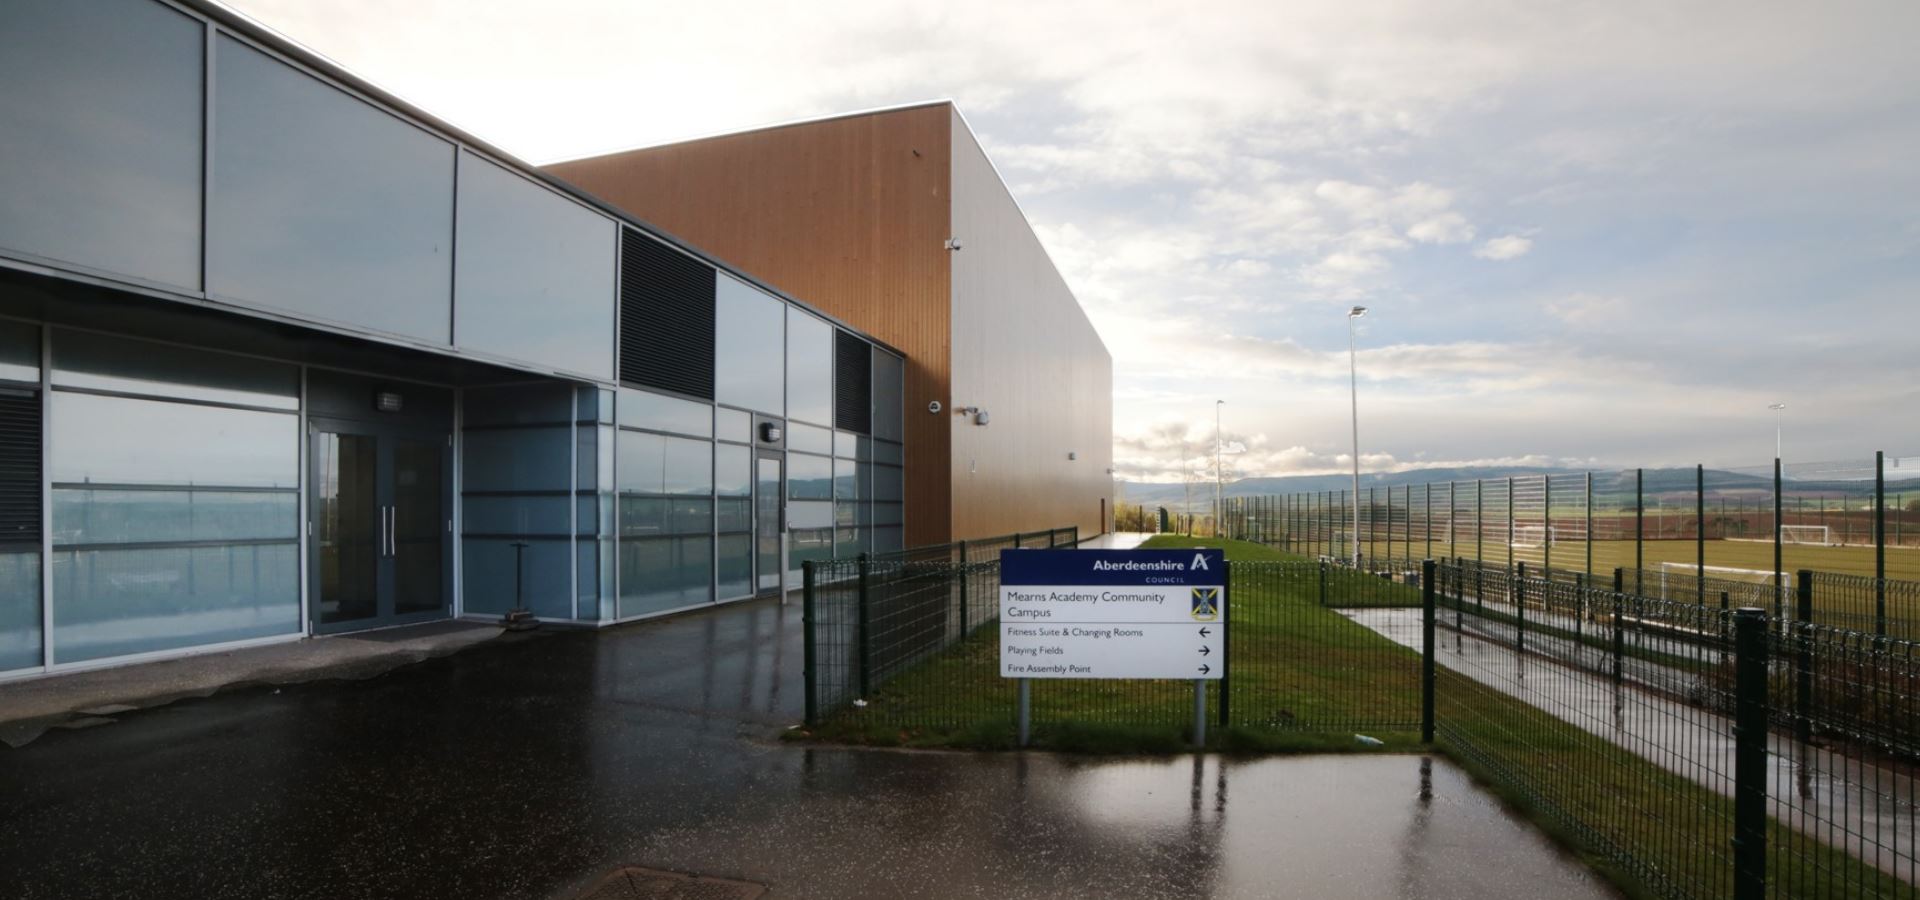 Laurencekirk - Mearns Academy Community Campus